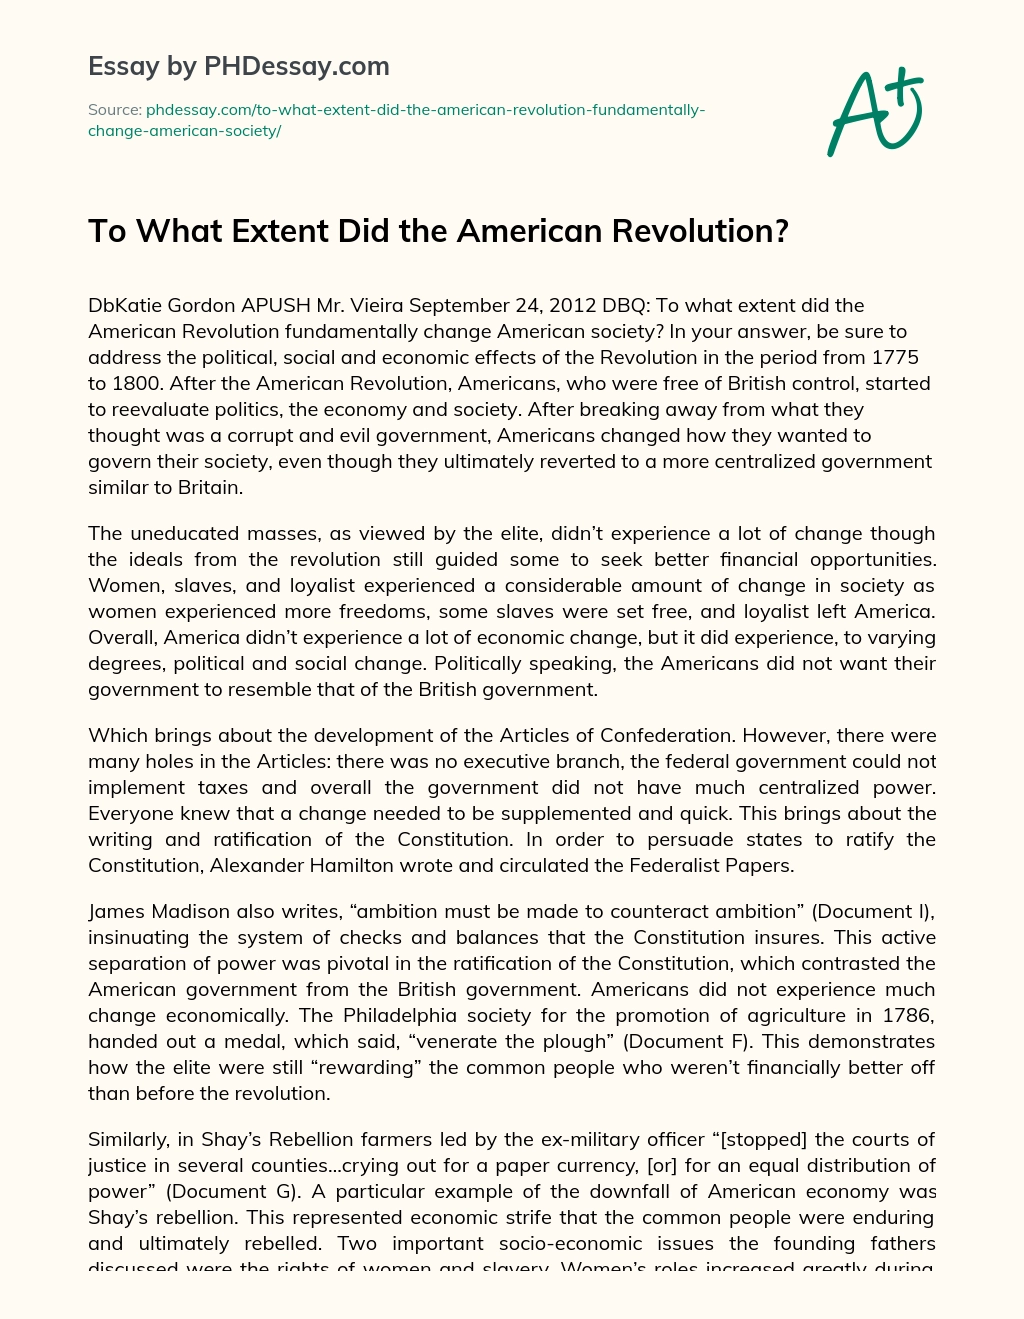 To What Extent Did the American Revolution? essay